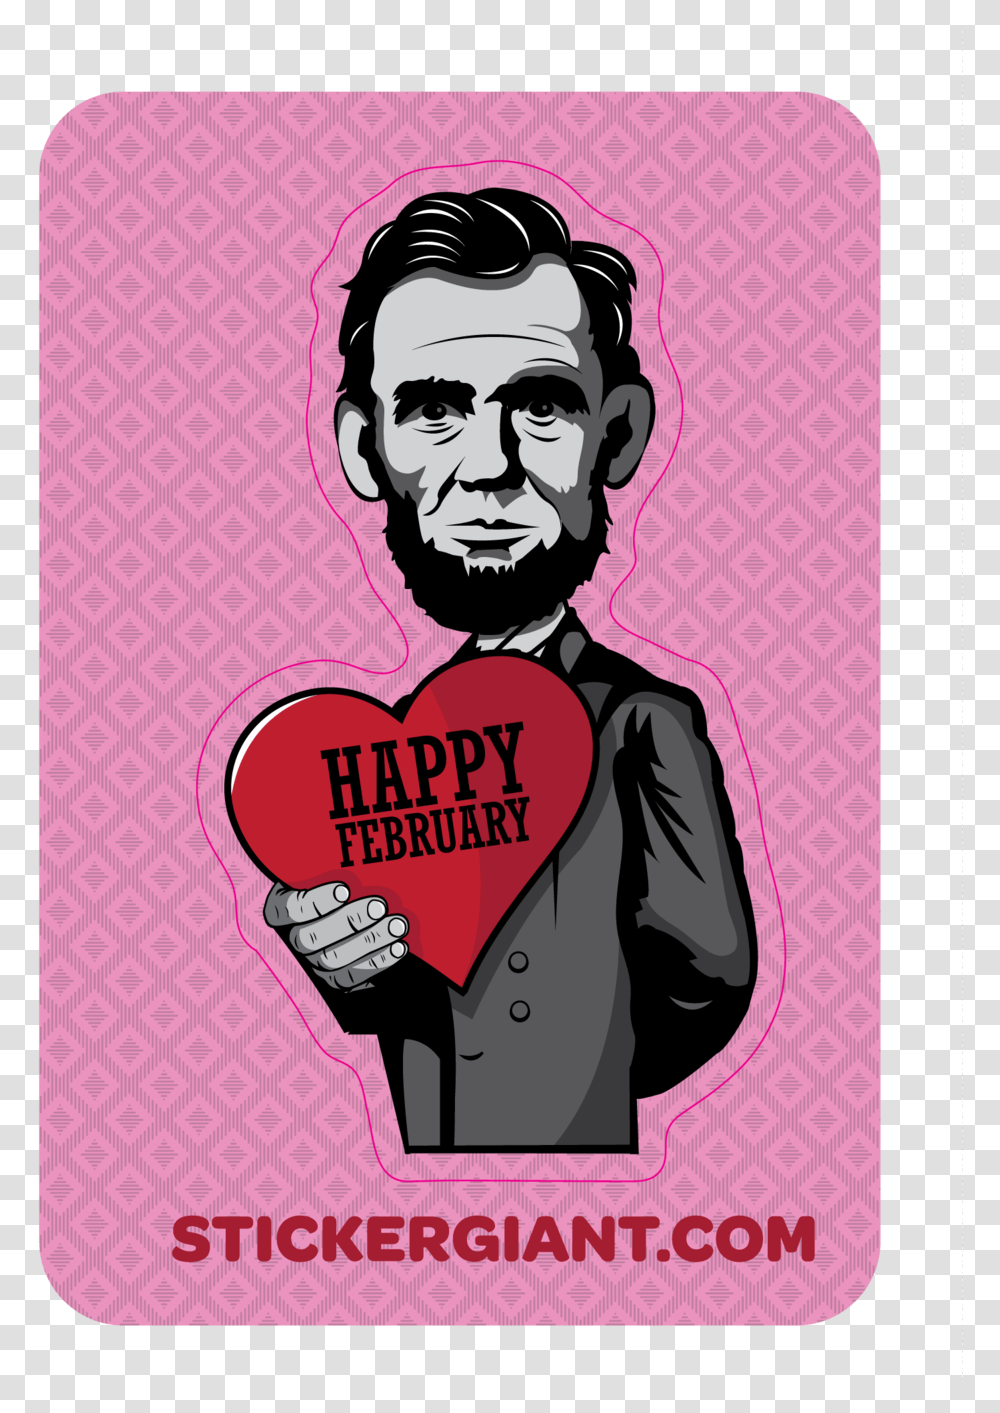 Custom Abe Lincoln Sticker Design For Stickergiant Guinness, Advertisement, Poster, Flyer, Paper Transparent Png